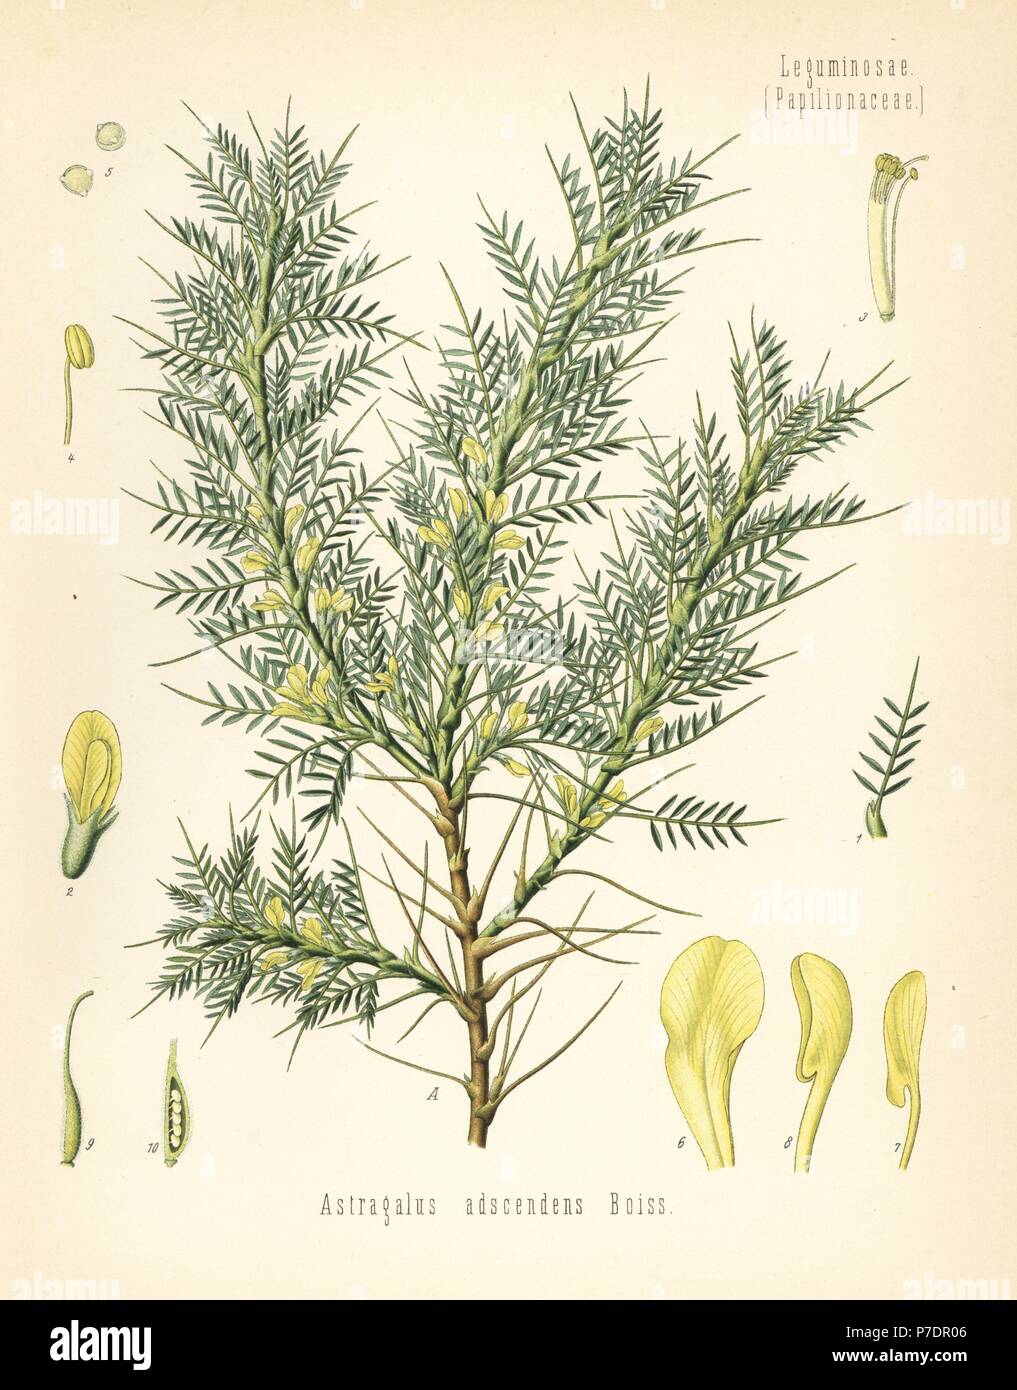 Persian manna or tragacanth, Astracantha adscendens (Astragalus adscendens). Chromolithograph after a botanical illustration from Hermann Adolph Koehler's Medicinal Plants, edited by Gustav Pabst, Koehler, Germany, 1887. Stock Photo